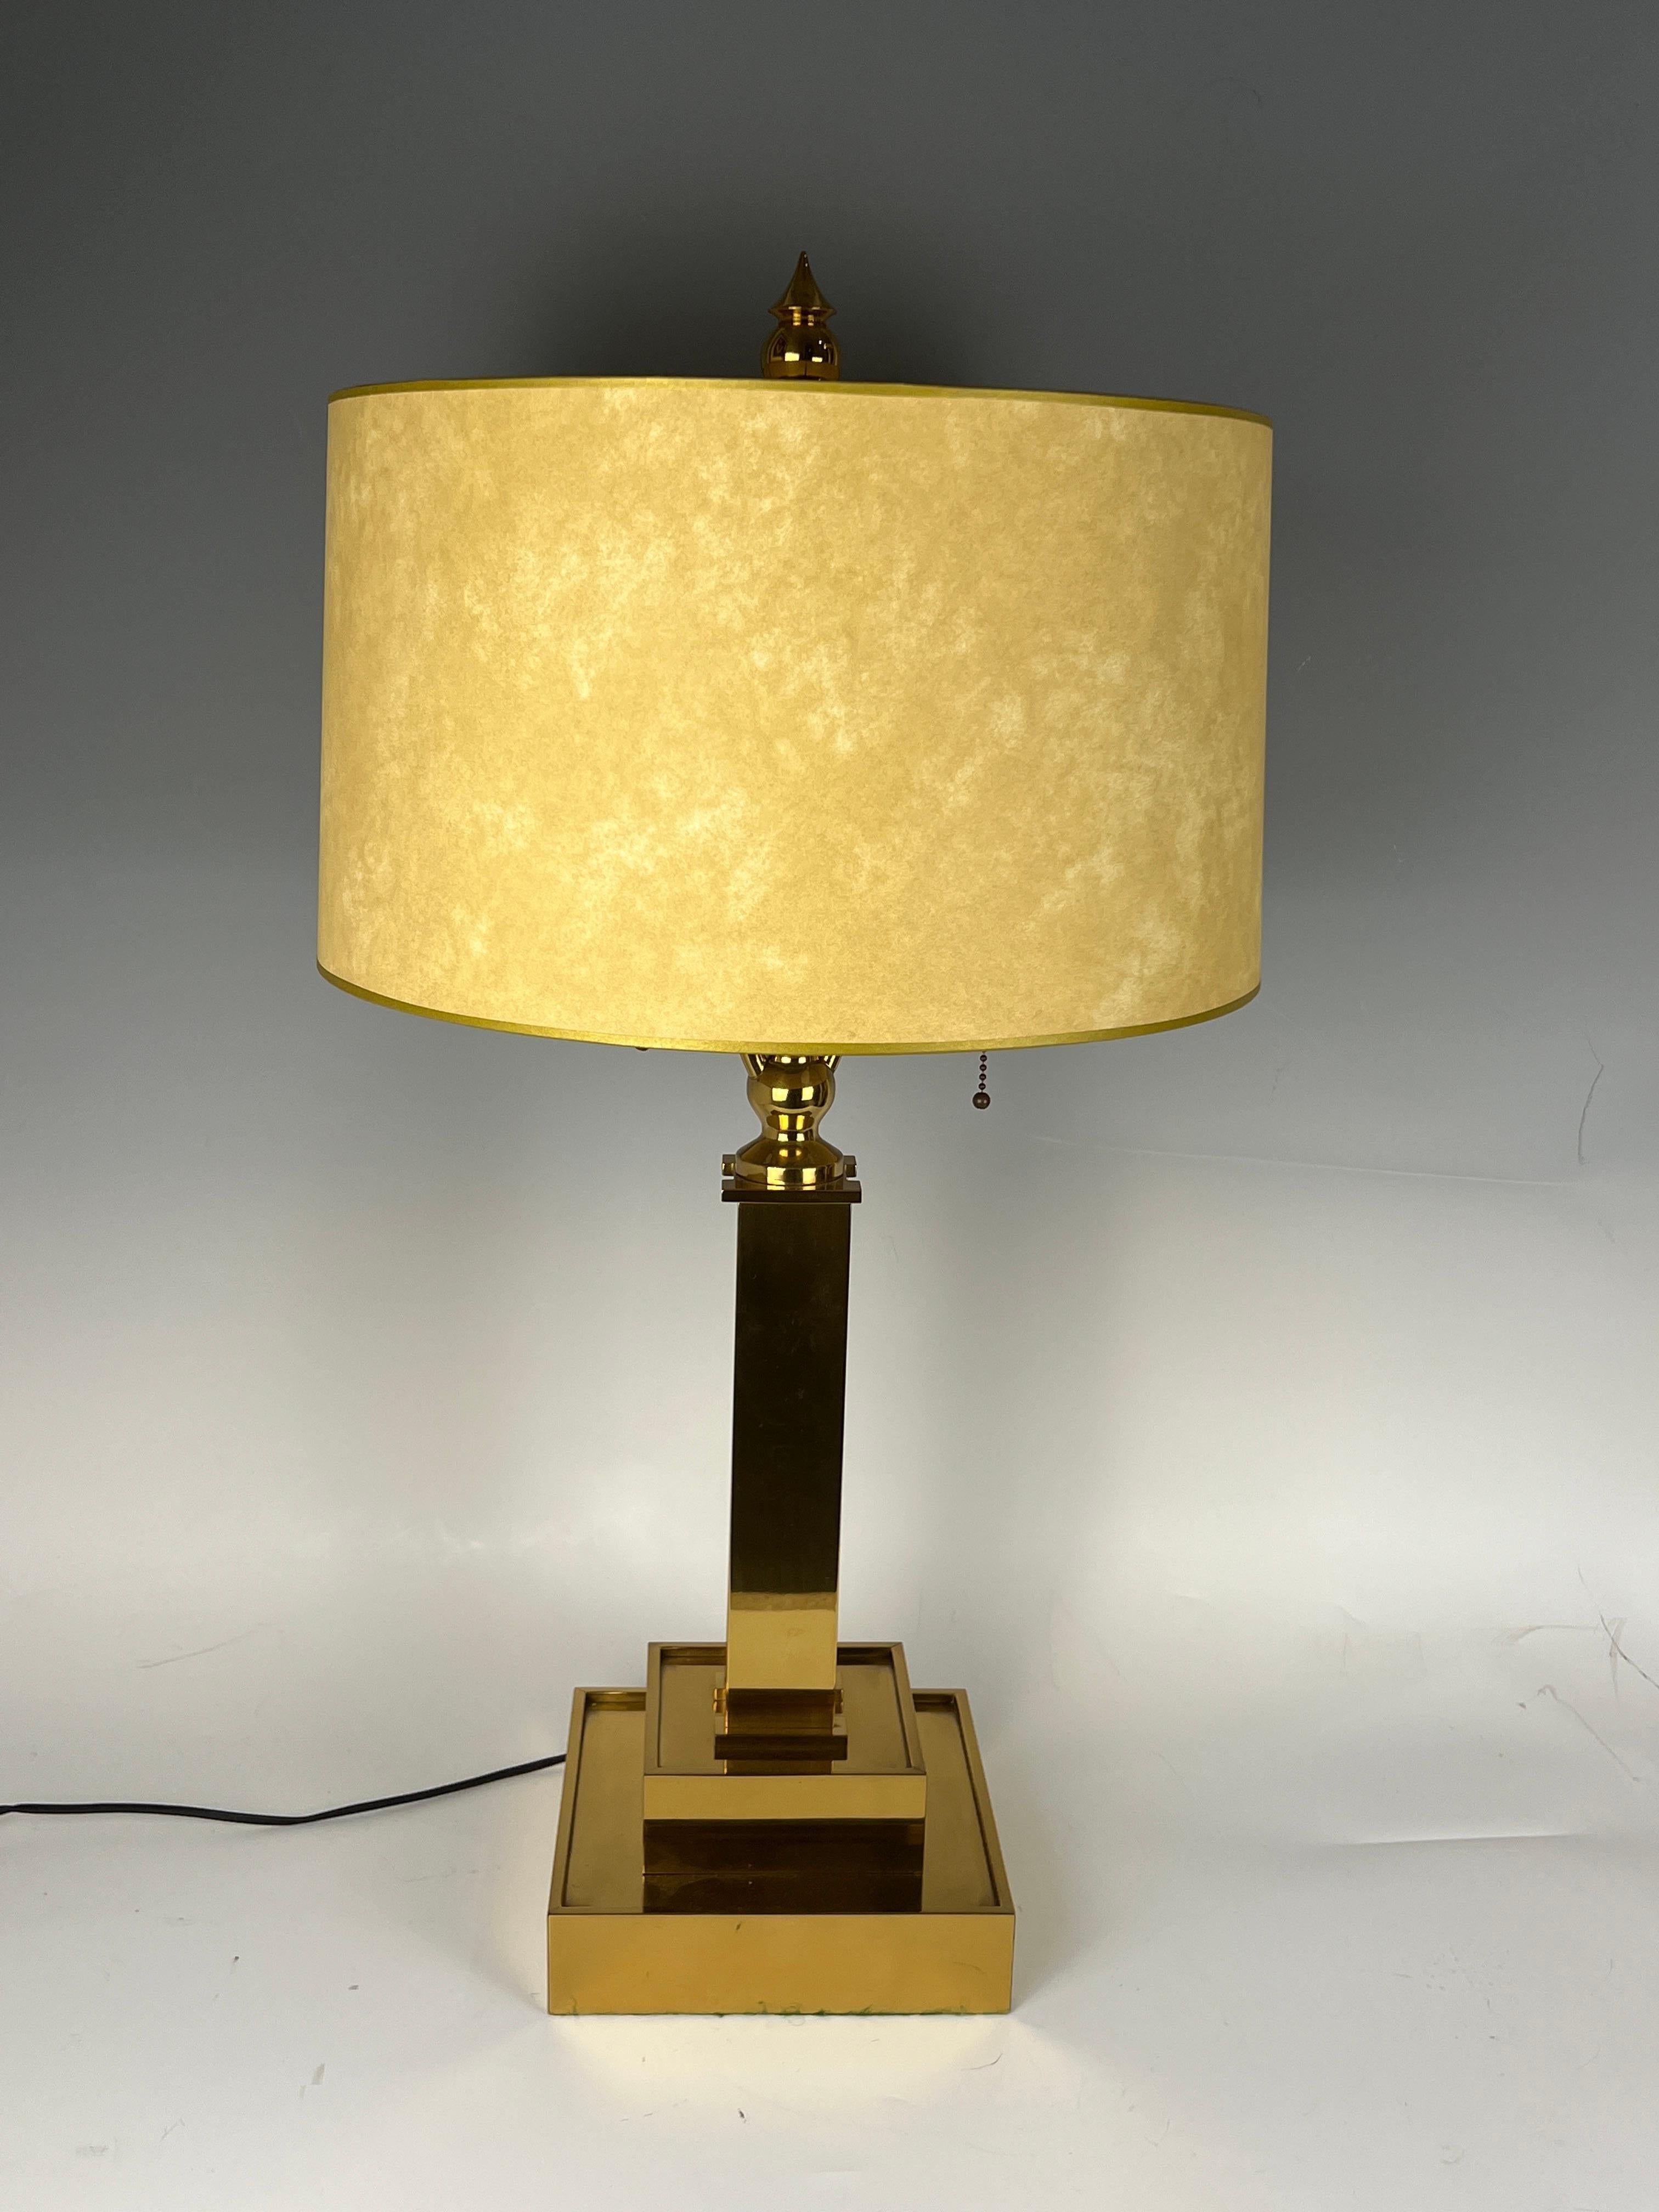 An Art Deco table lamp in brass with a beige color paper shade.
Made in France.